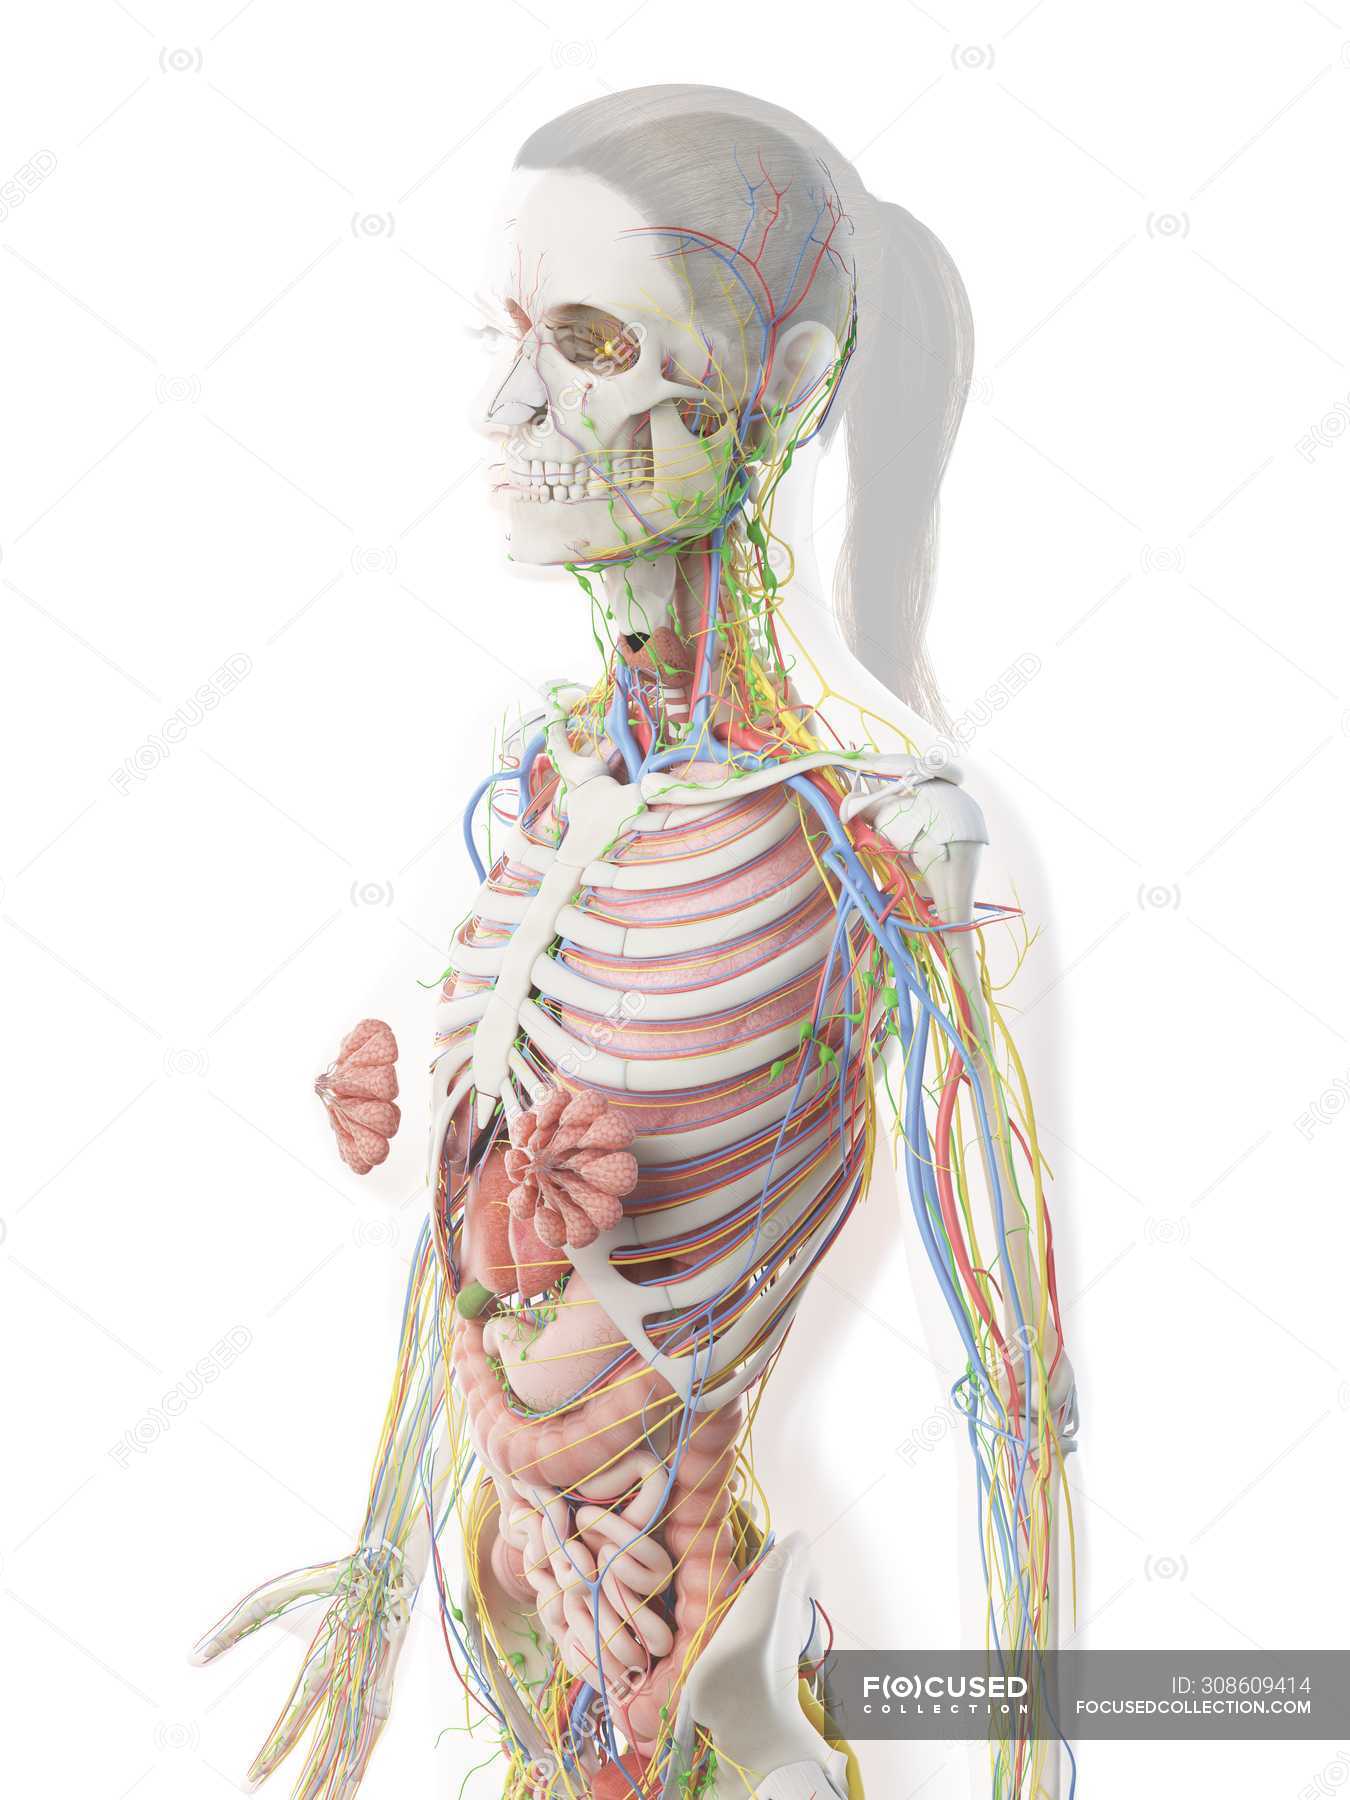 Female Upper Body Anatomy And Internal Organs Computer Illustration Artwork Lungs Stock Photo 308609414